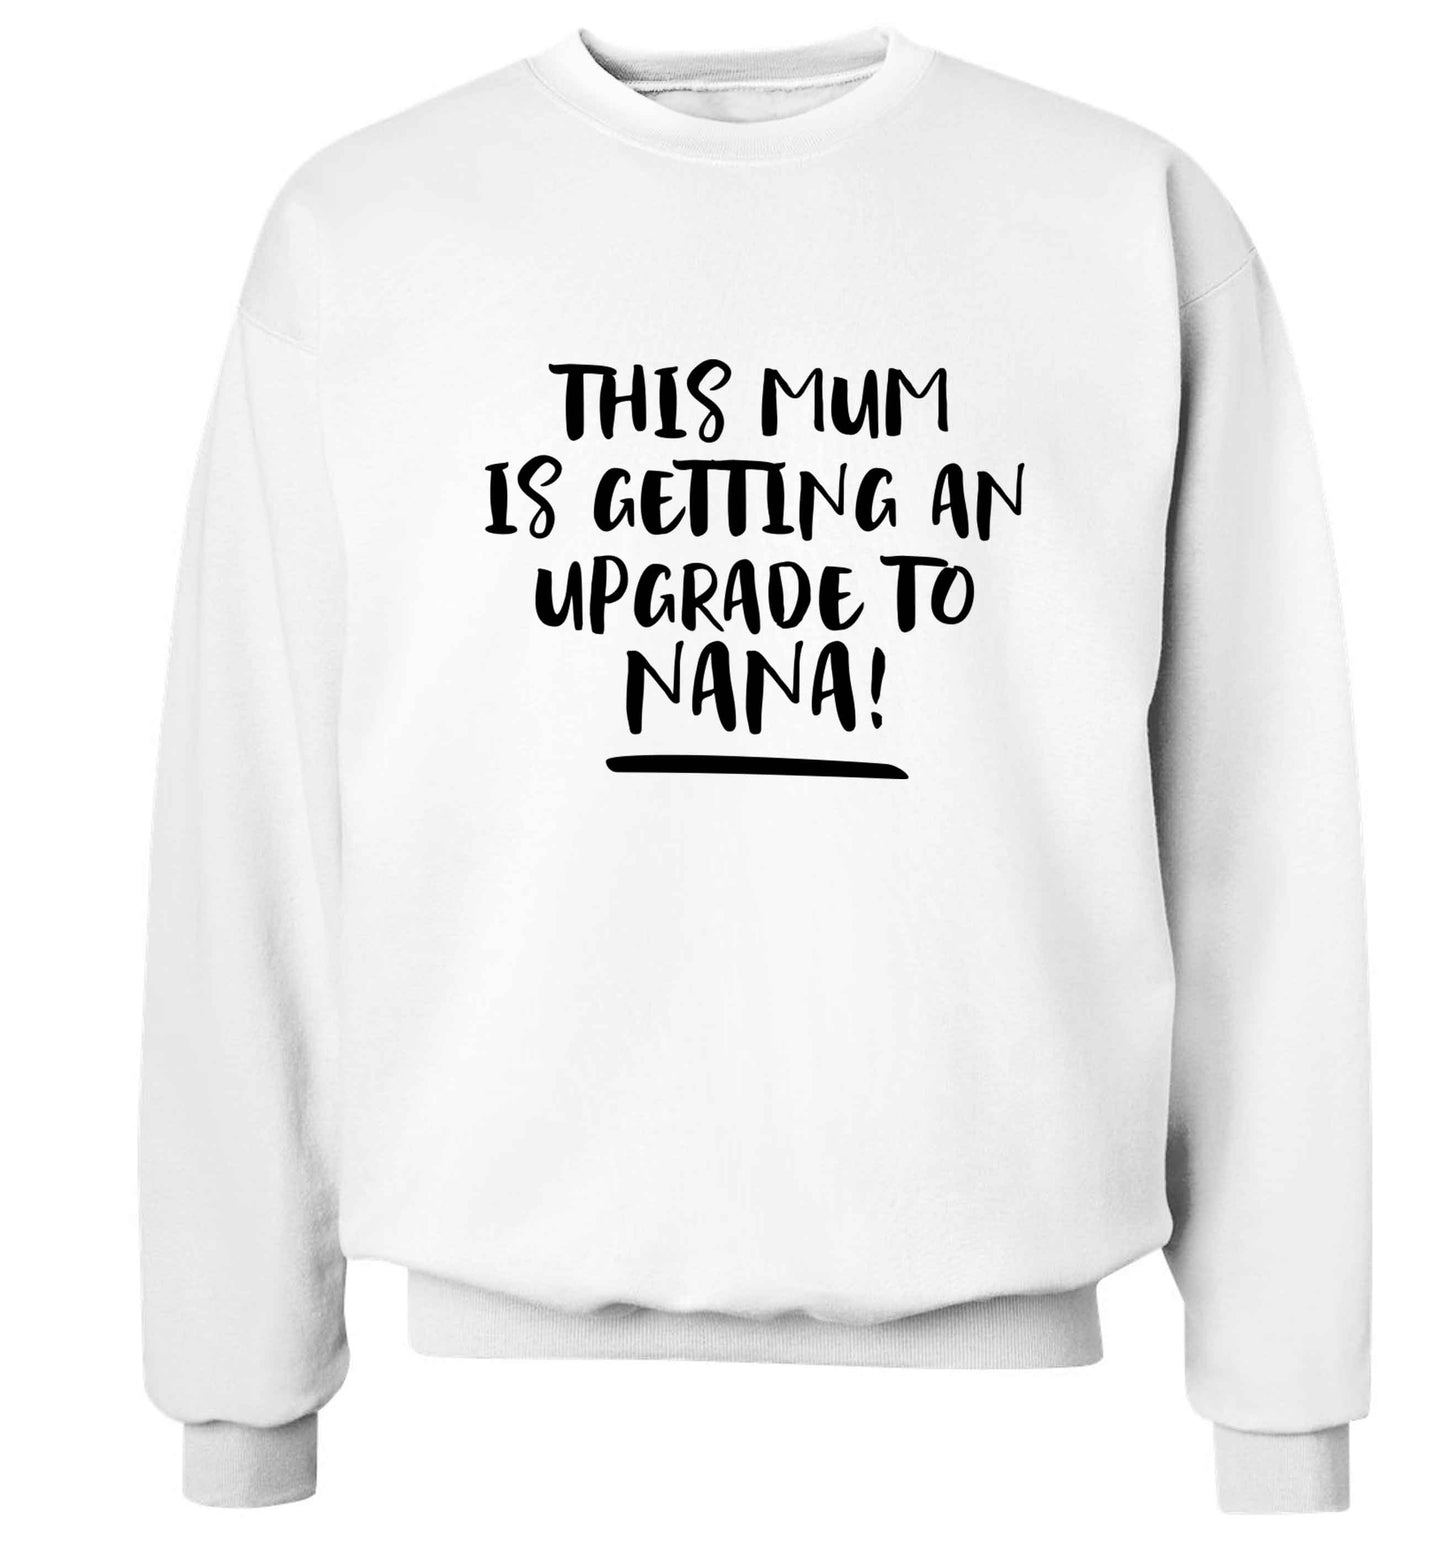 This mum is getting an upgrade to nana! Adult's unisex white Sweater 2XL